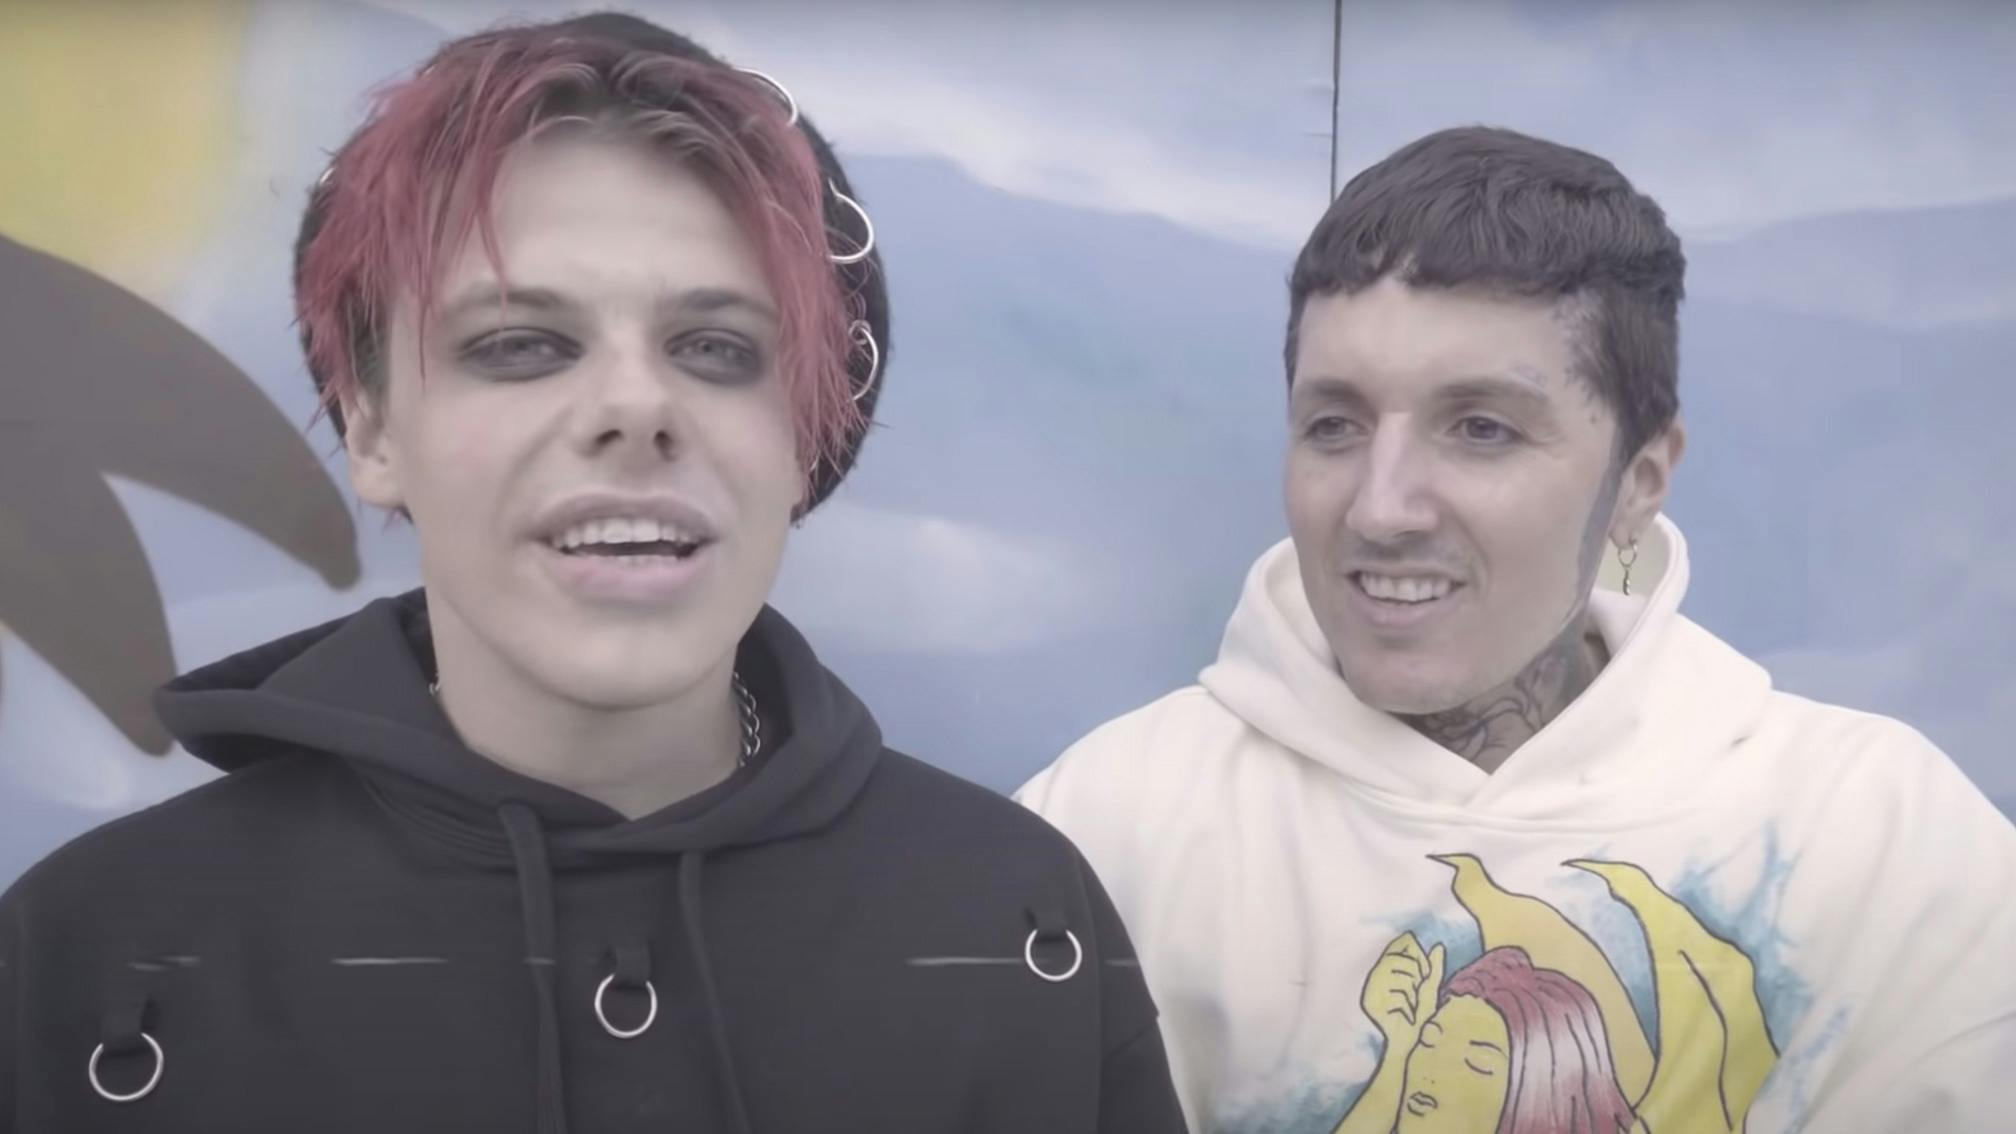 Watch: Behind The Scenes Of Bring Me The Horizon And YUNGBLUD Making Obey